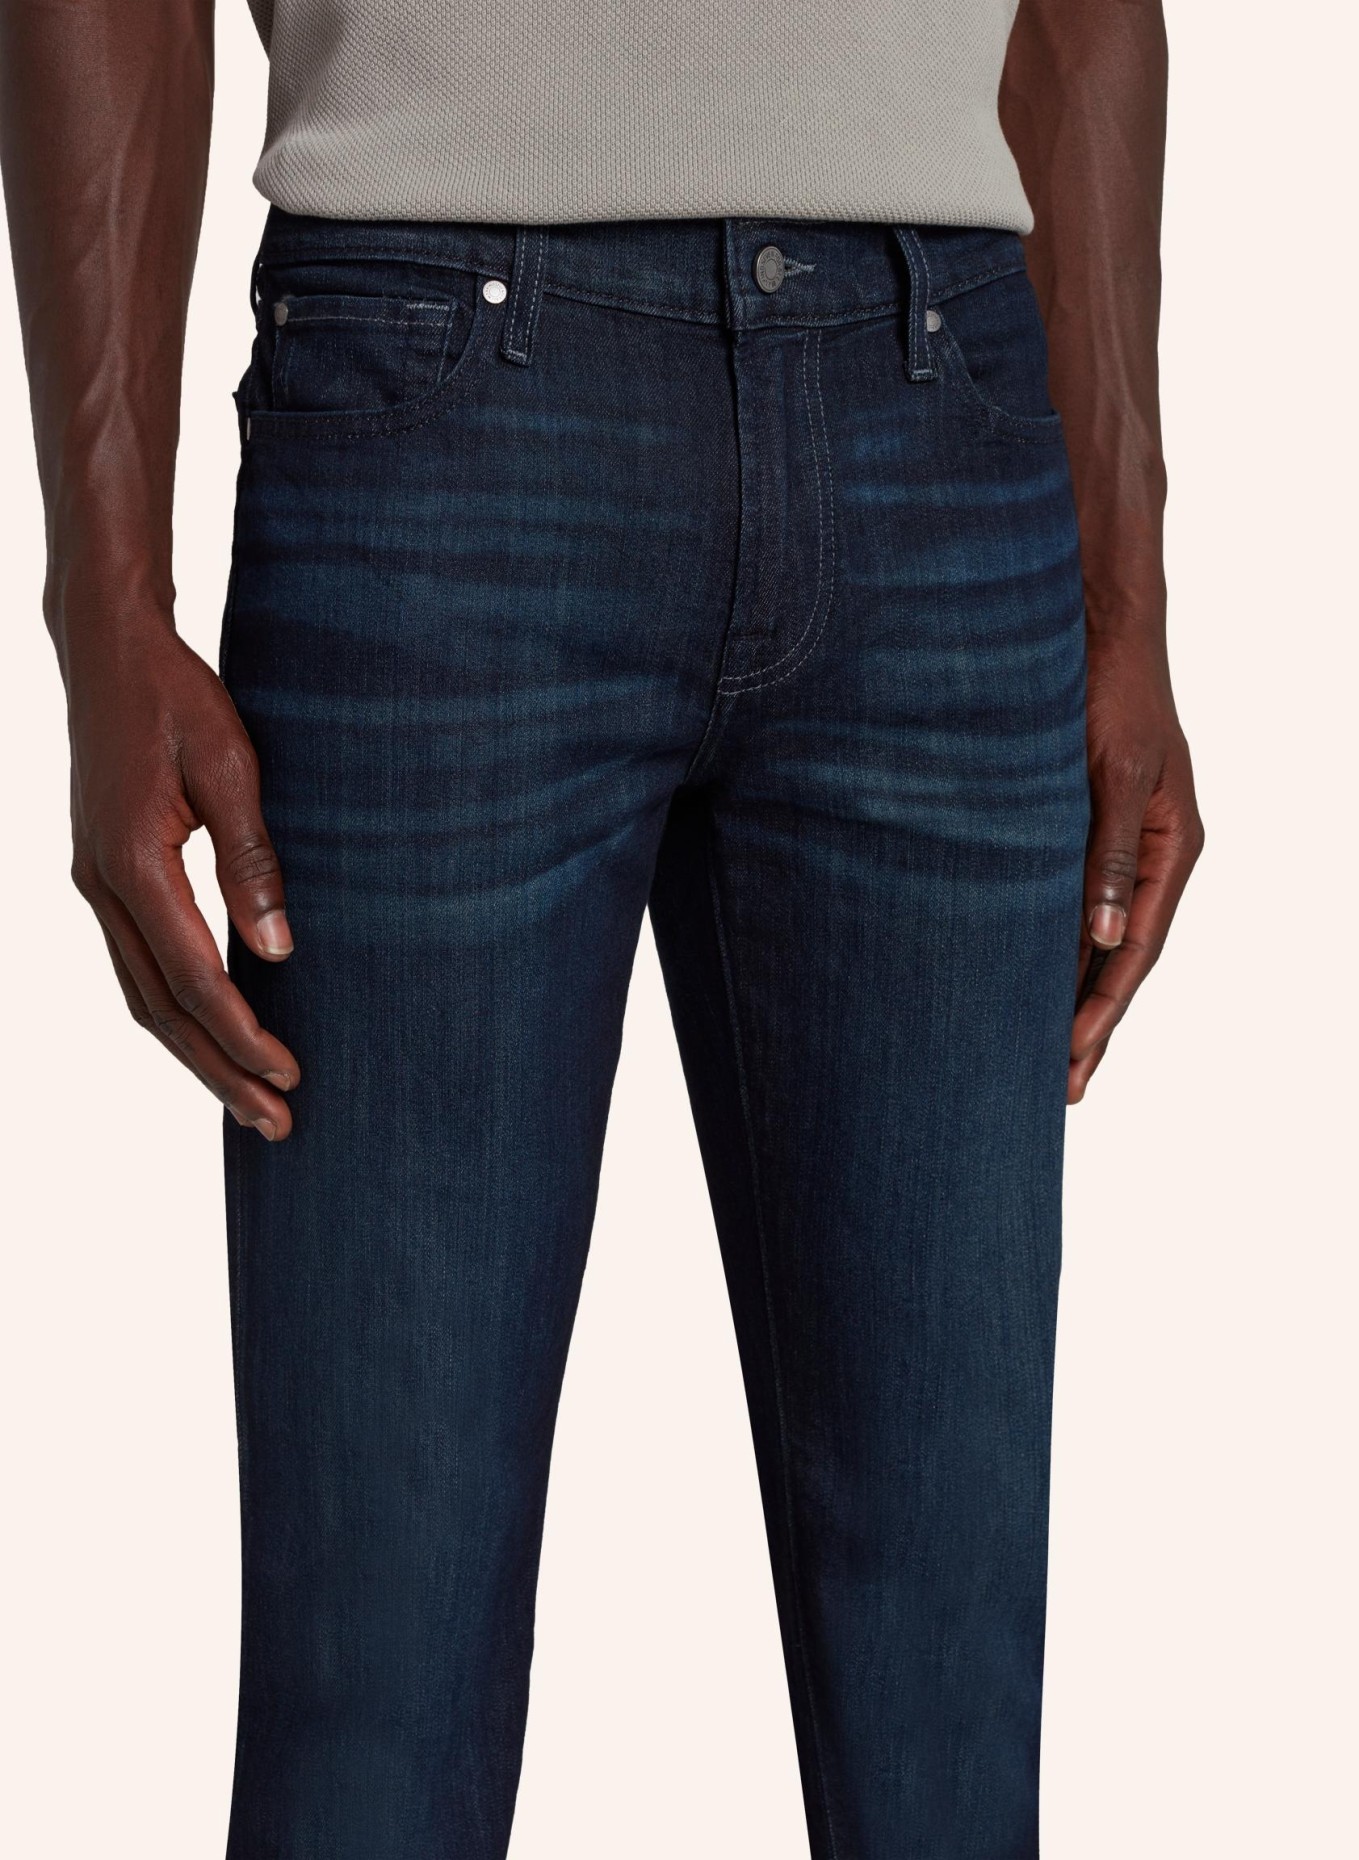 7 for all mankind Jeans Slim Fit  (Bild 3)